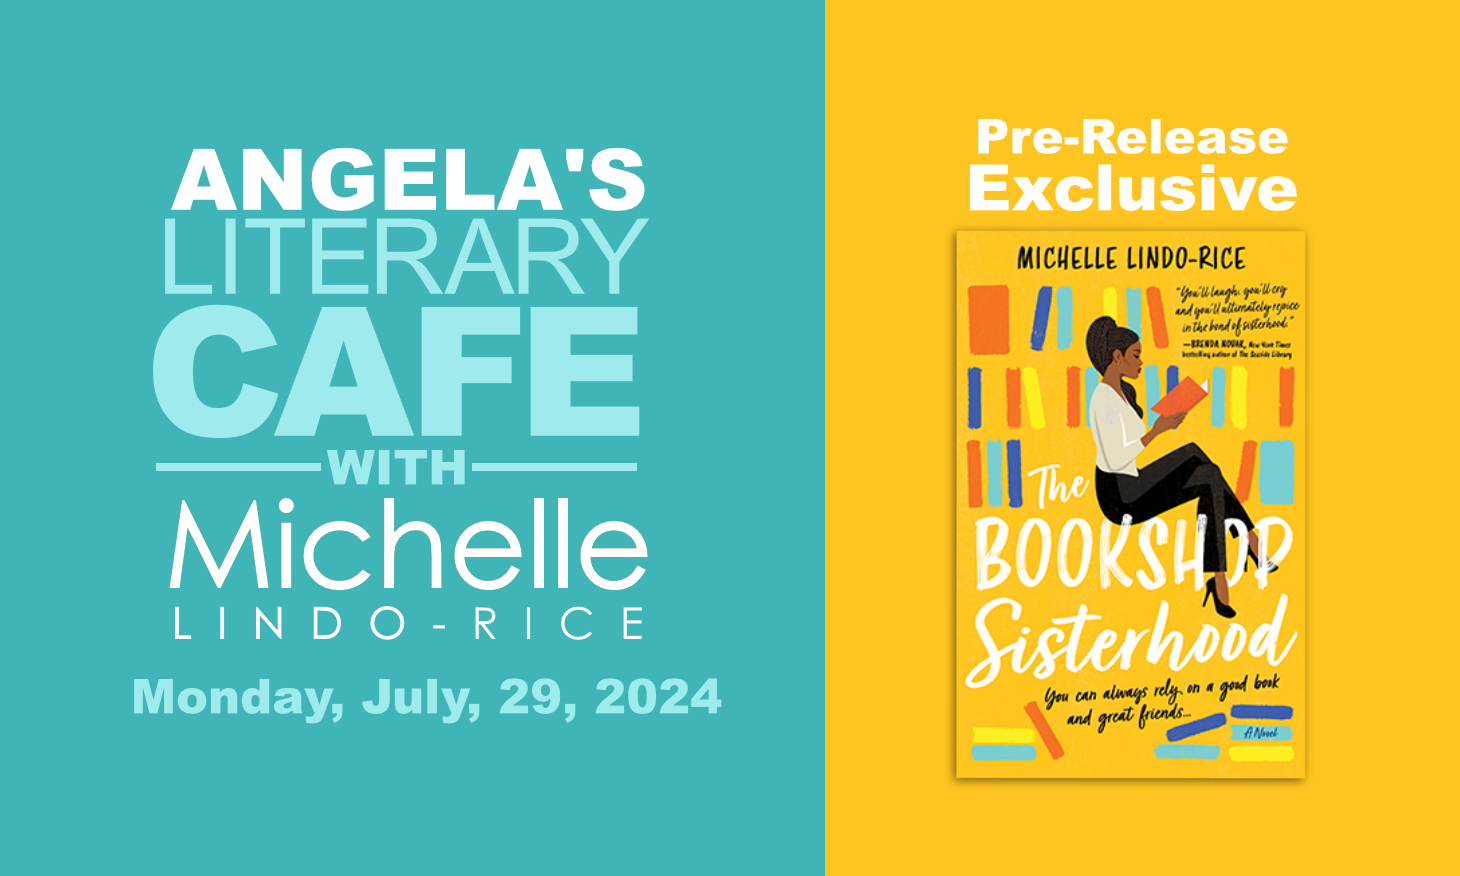 Angela's Literary Cafe with Michelle Lindo-Rice